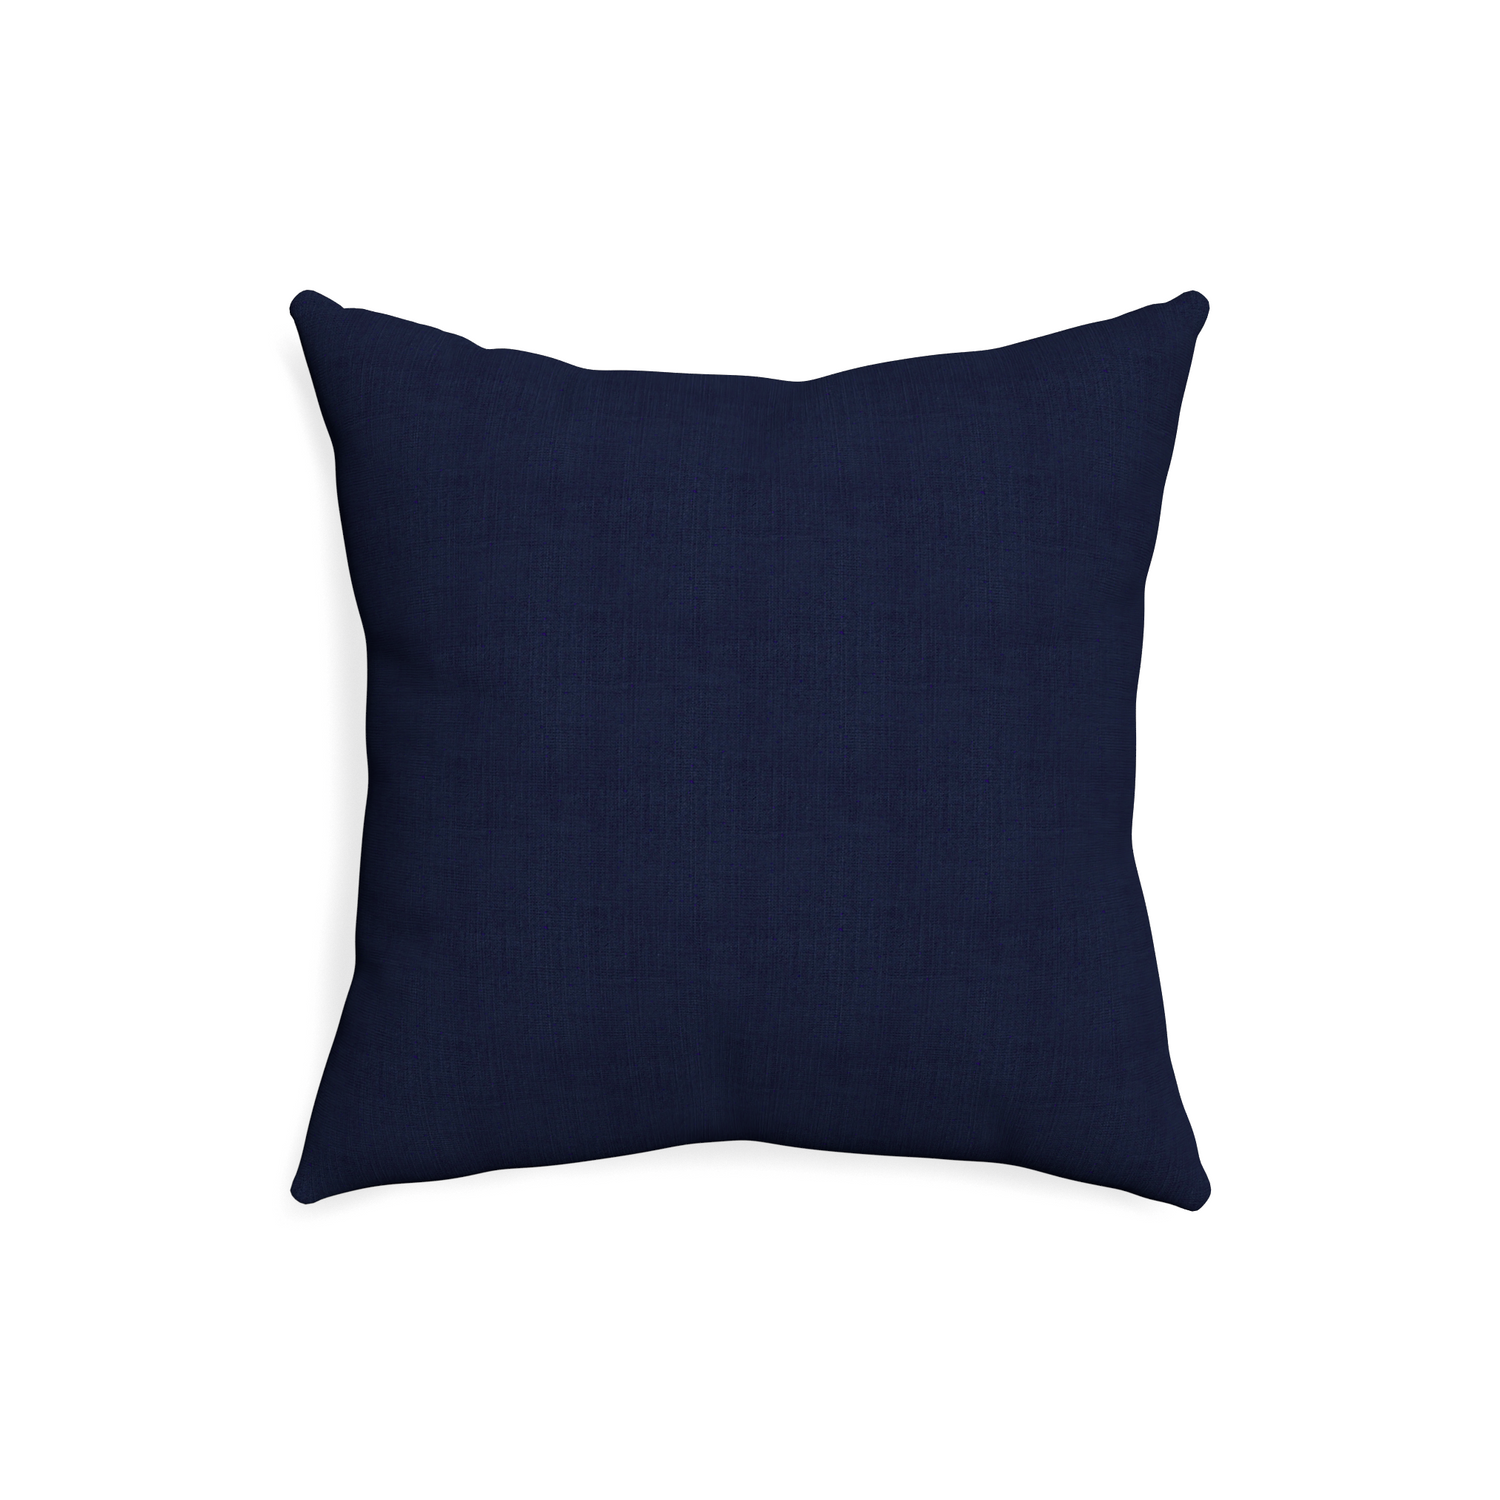 20-square midnight custom navy bluepillow with none on white background